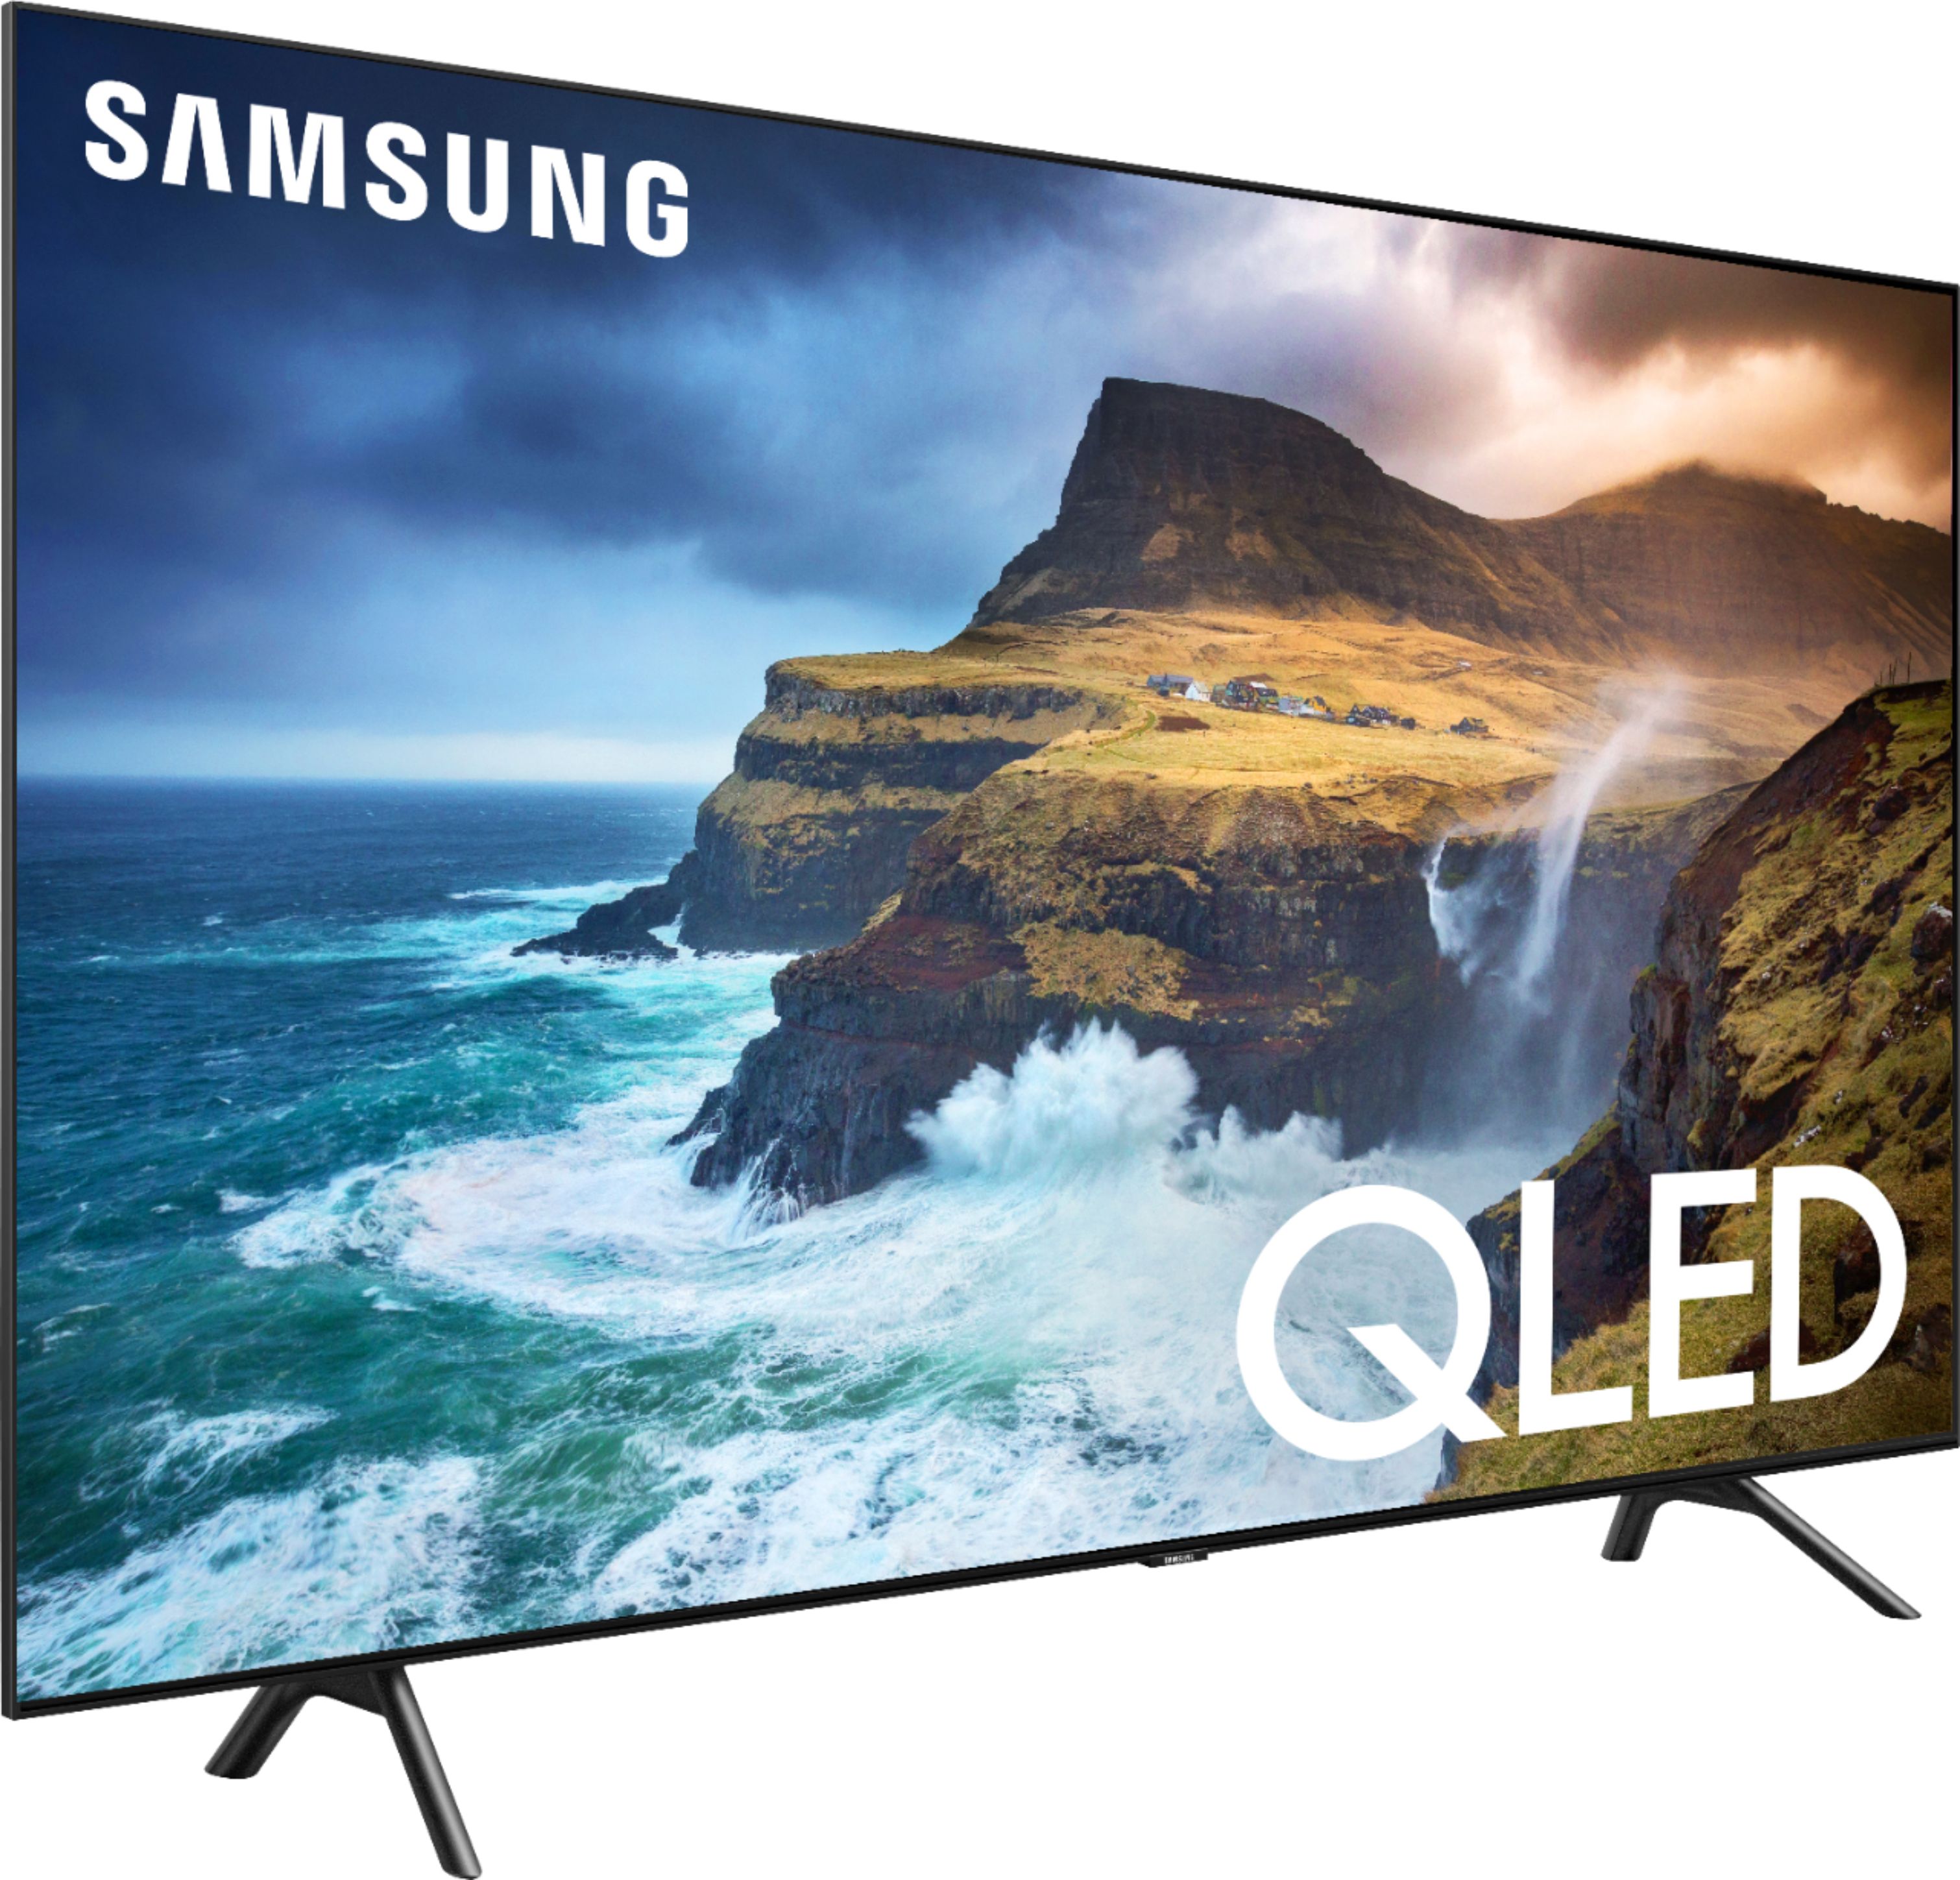 Questions and Answers Samsung 85" Class LED Q70 Series 2160p Smart 4K